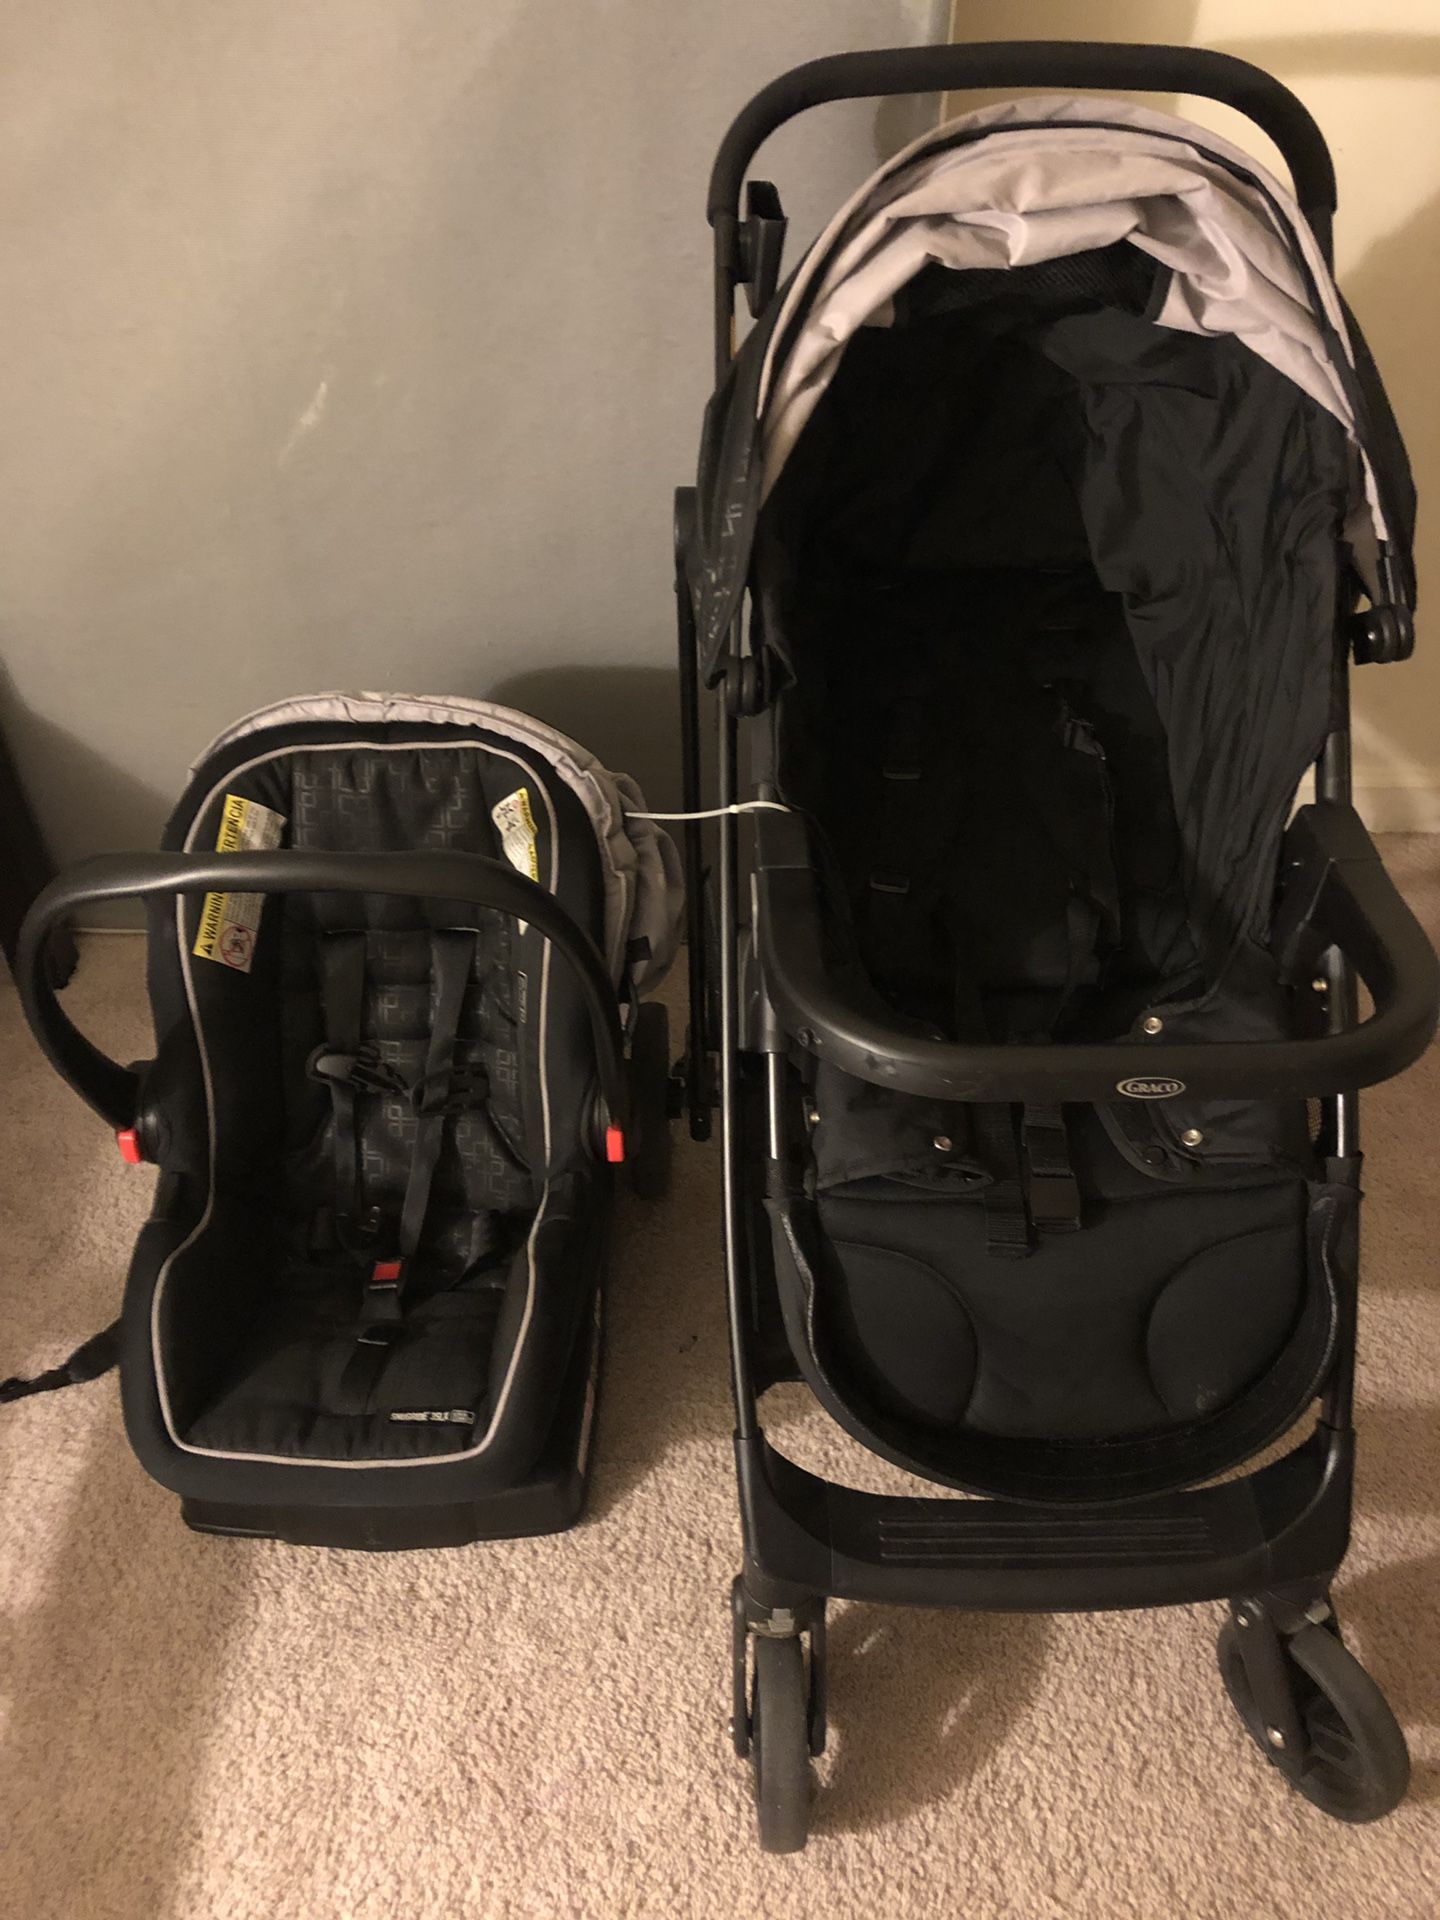 Chico baby car seat with base and stroller